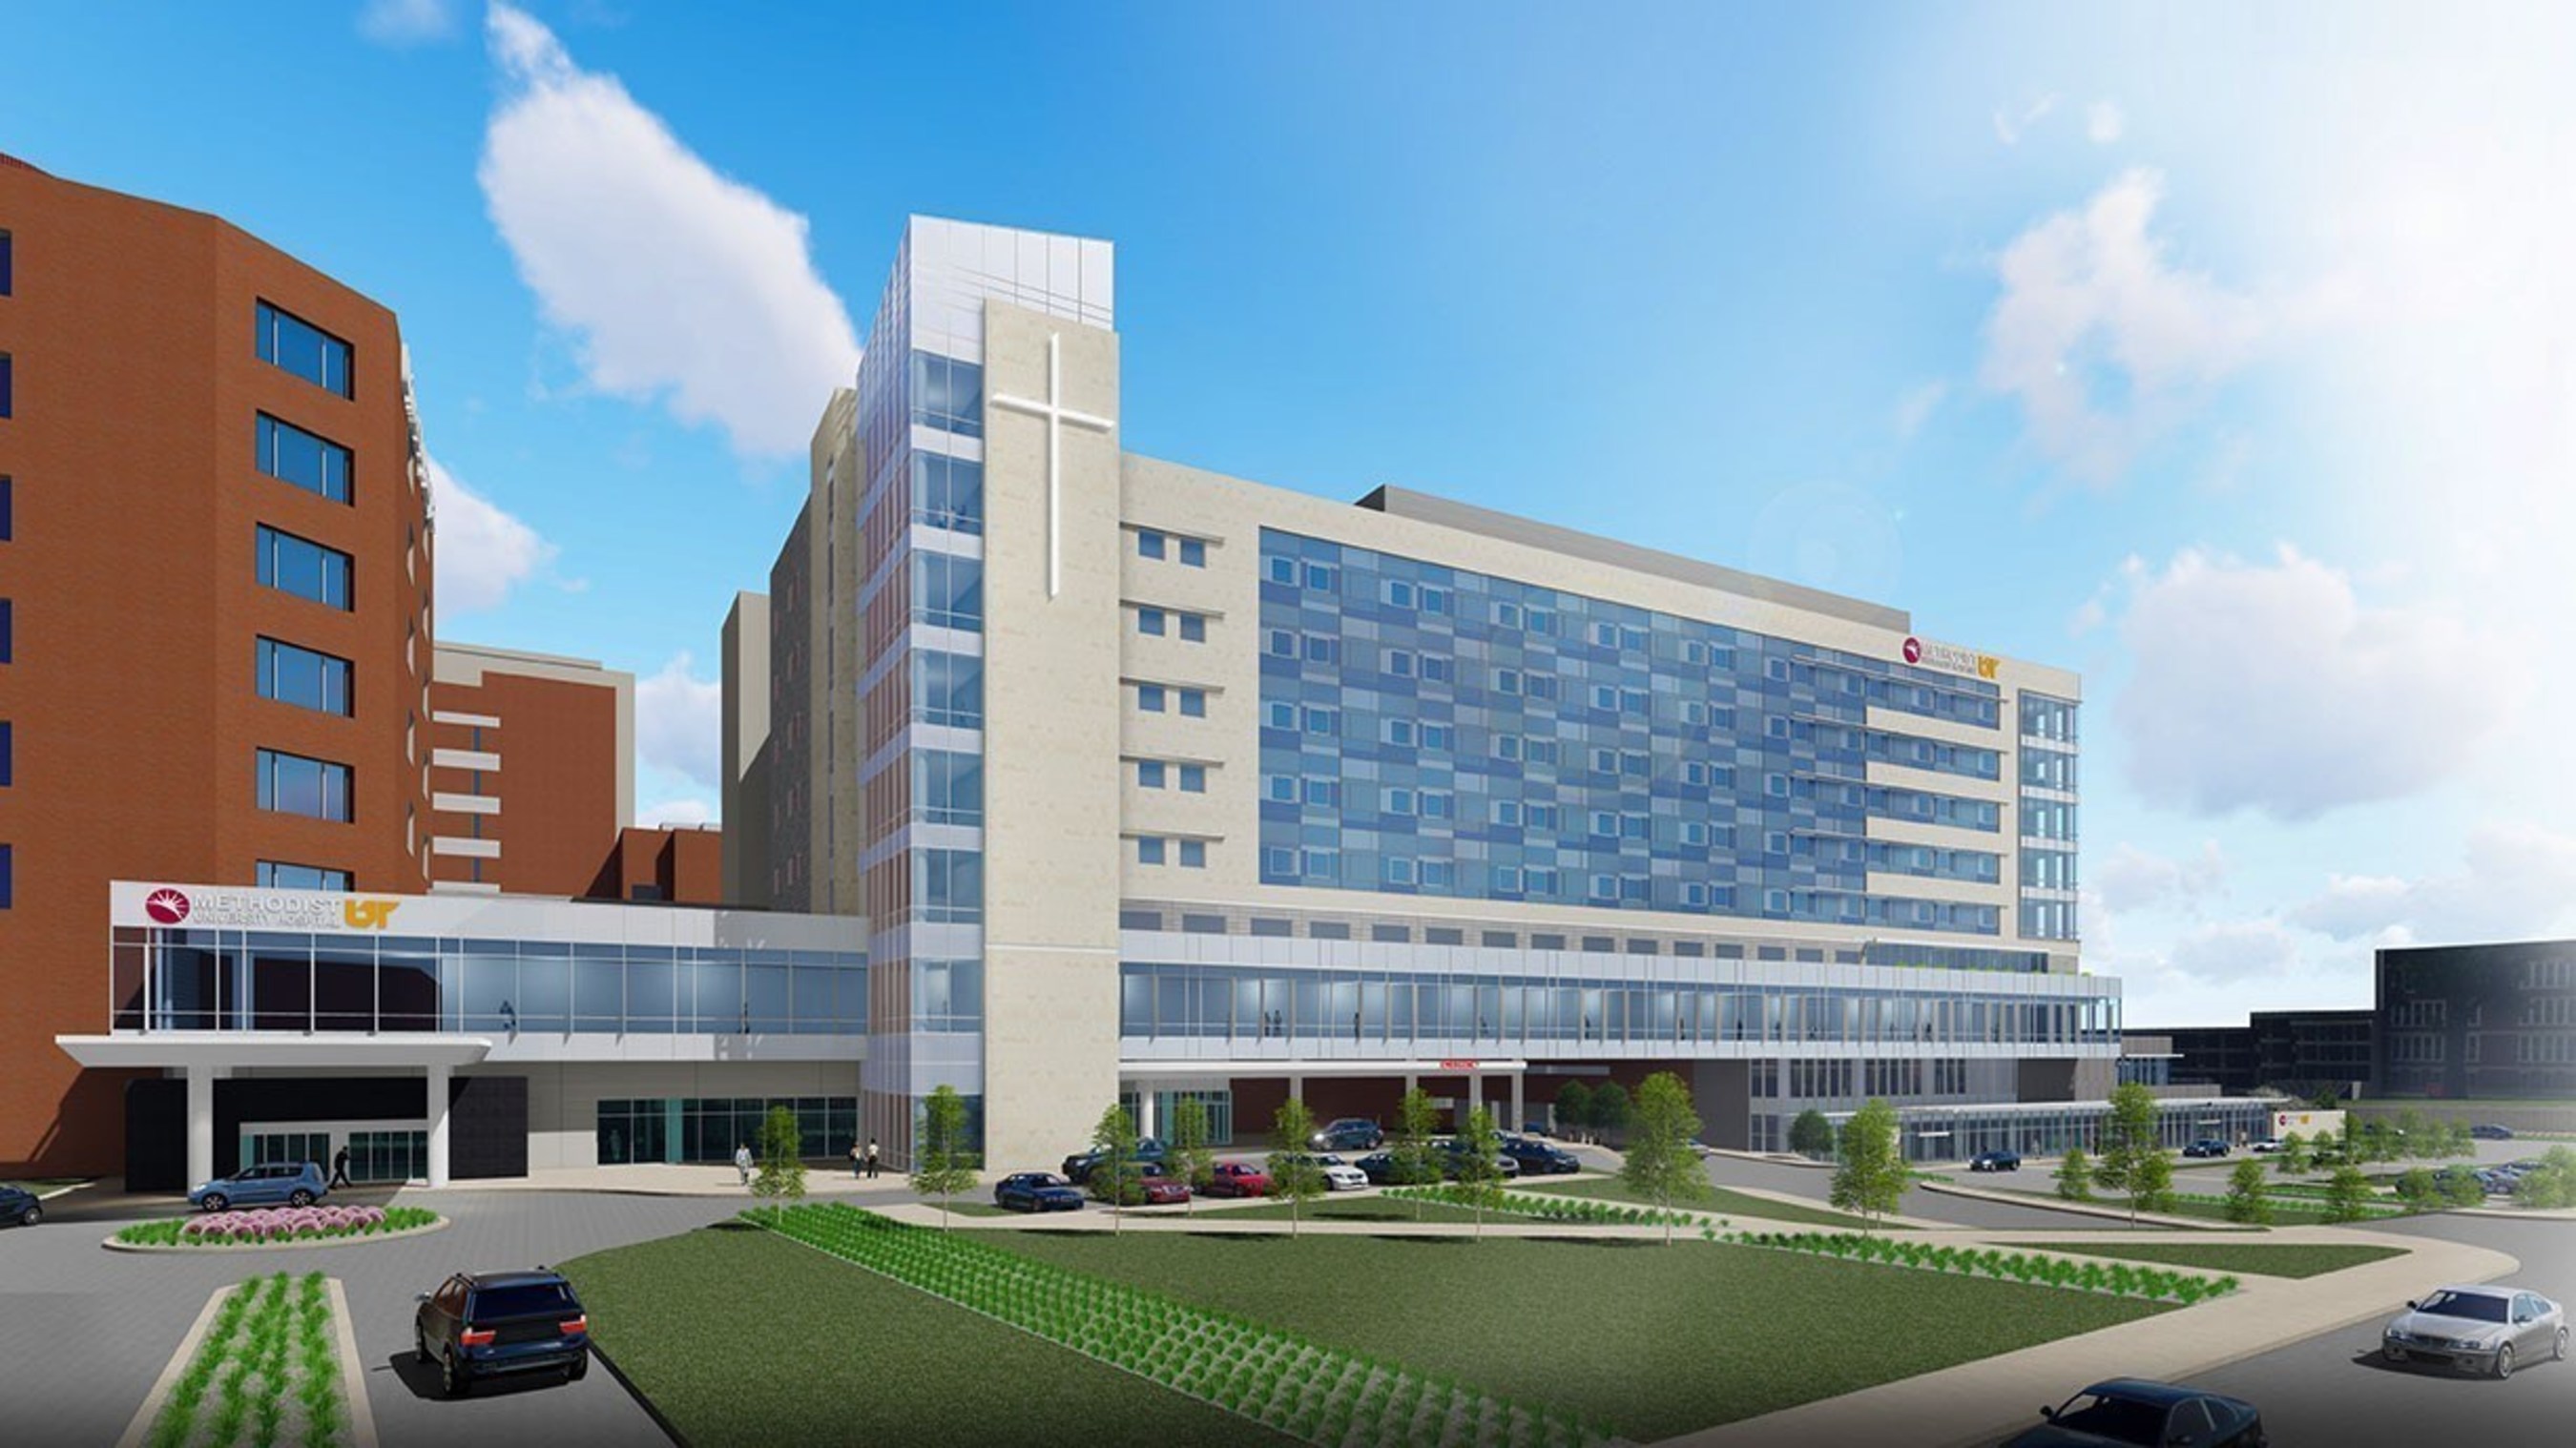 Thanks to a $12.9 million technology contract with Johnson Controls, Methodist University Hospital, Memphis, Tennessee, will add 440,000 square feet to its campus, including a nine-story patient tower, and invest in state-of-the-art healthcare equipment.